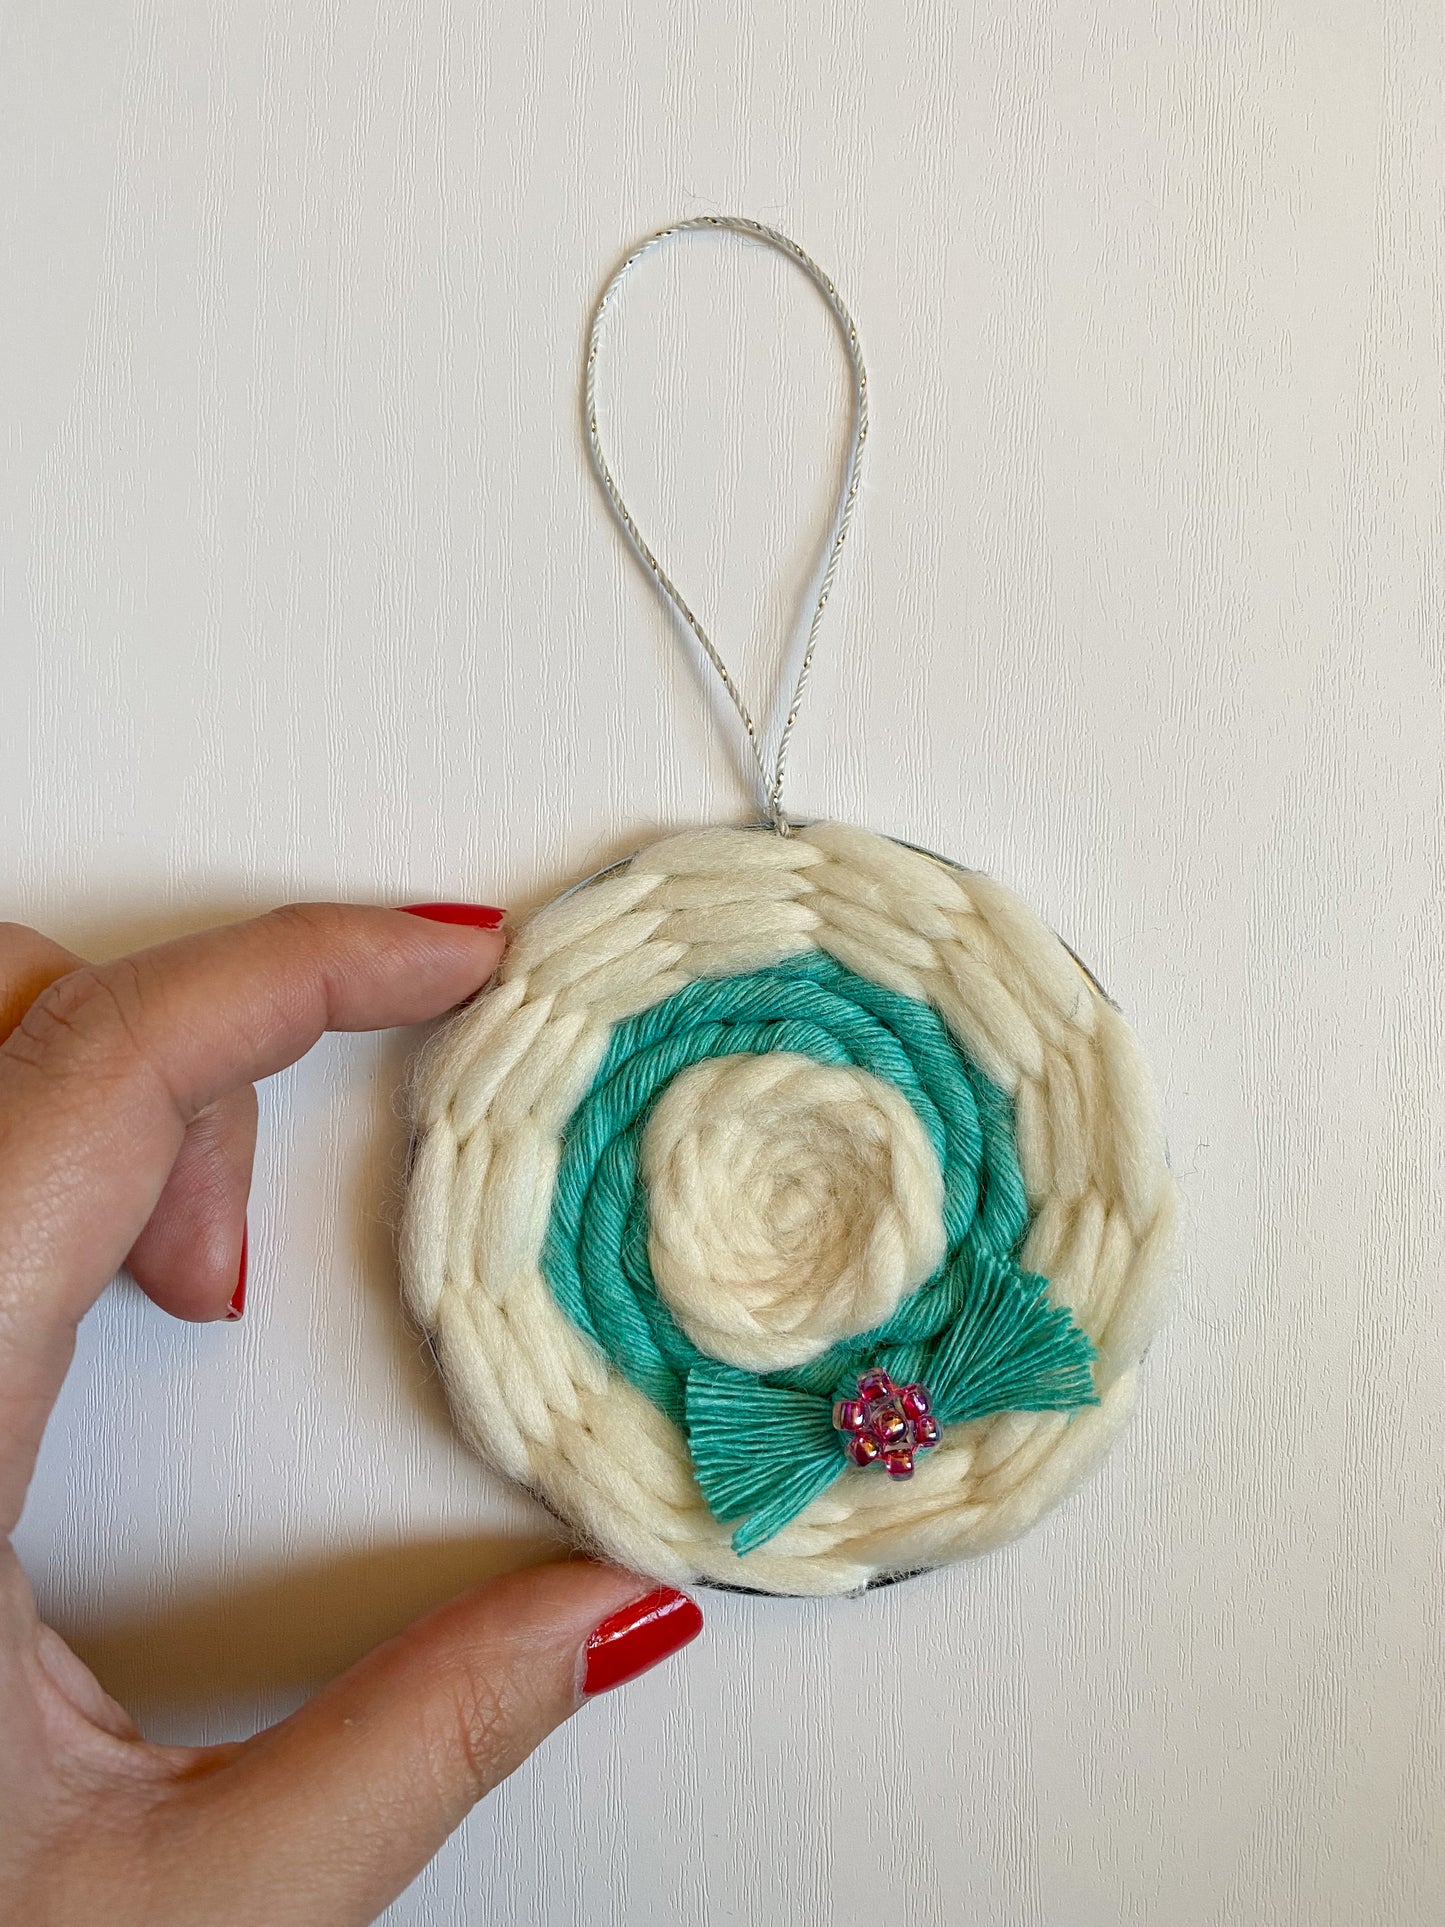 Woven Wreath Holiday Ornaments